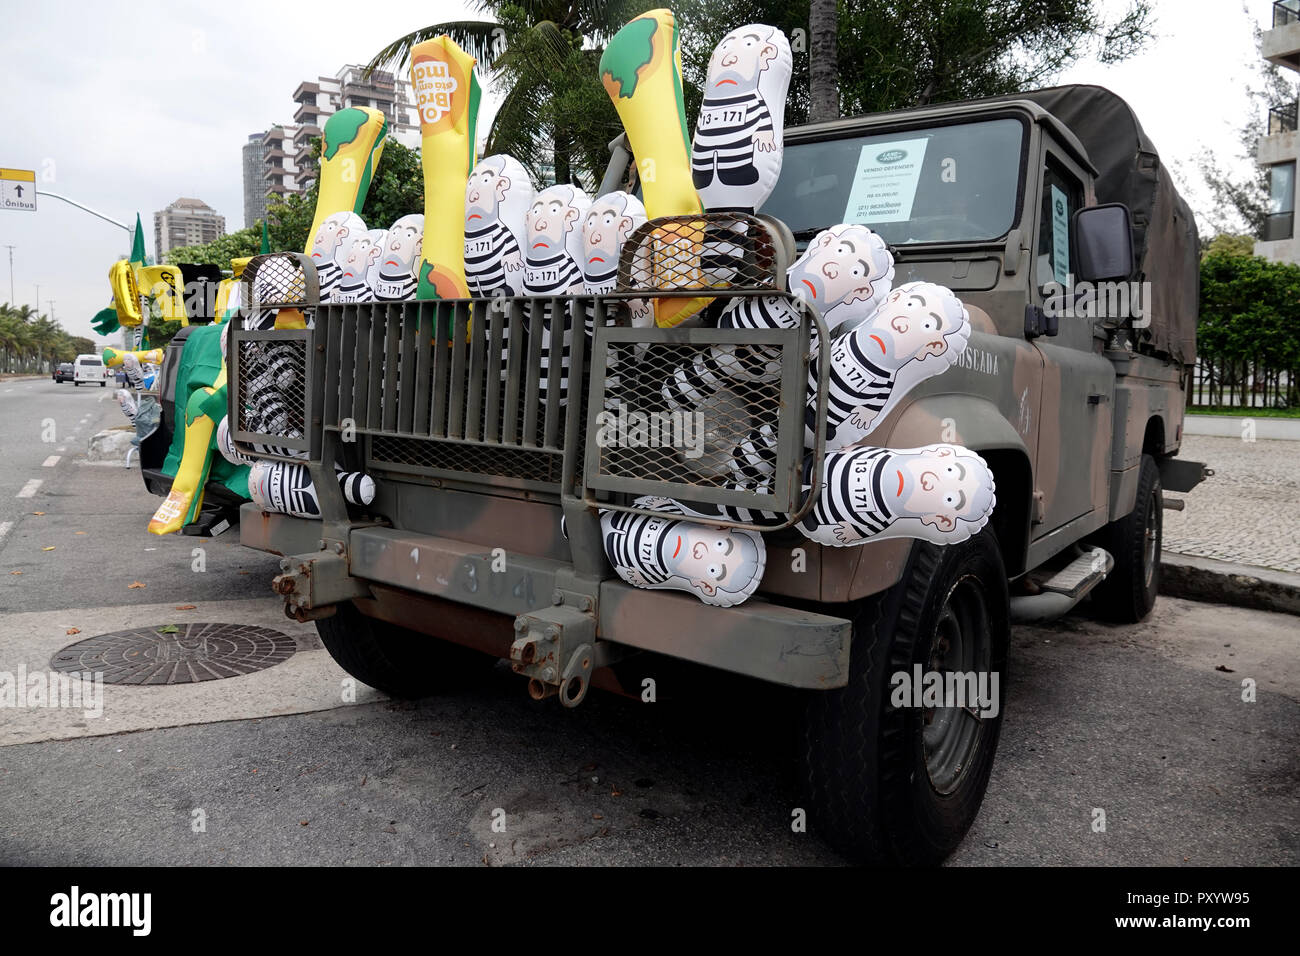 Rio De Janeio, Brazil. 17th Oct, 2018. Inflatable dolls on a military jeep show the imprisoned ex-president Lula da Silva in convict uniform. Many Brazilians also want to vote for the right-wing populist Bolsonaro out of frustration over the corruption under Lula. (to dpa report 'Before the presidential run-off election in Brazil' of 25.10.2018) Credit: Denis Düttmann/dpa/Alamy Live News Stock Photo